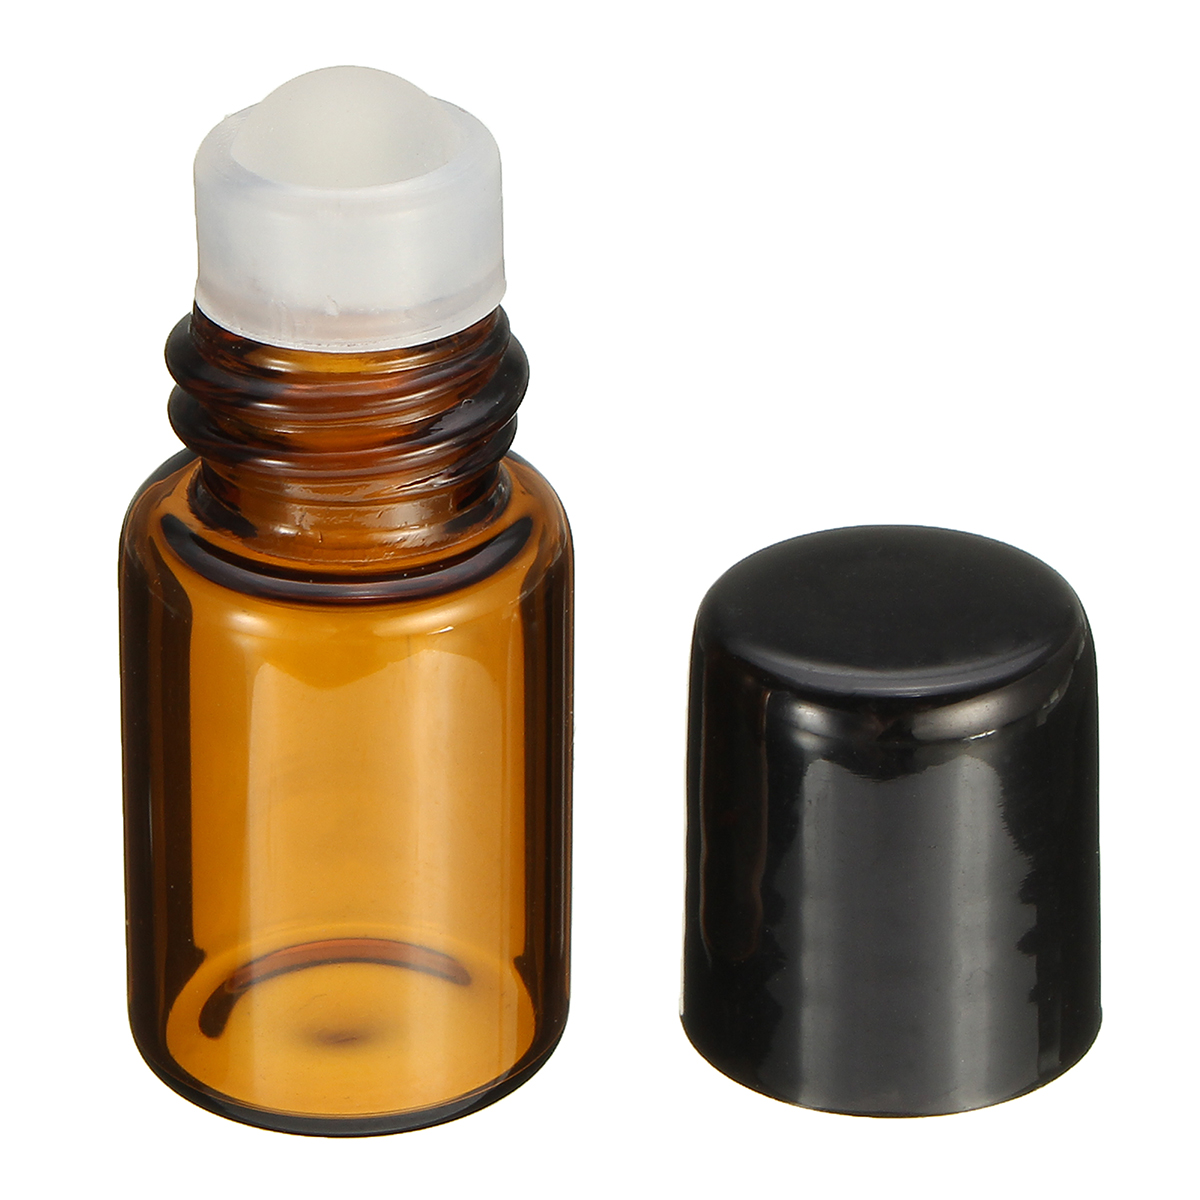 

2mL Empty Amber Glass Roll on Bottle Container Refillable Roller Ball Essential Oil Liquid Bottle